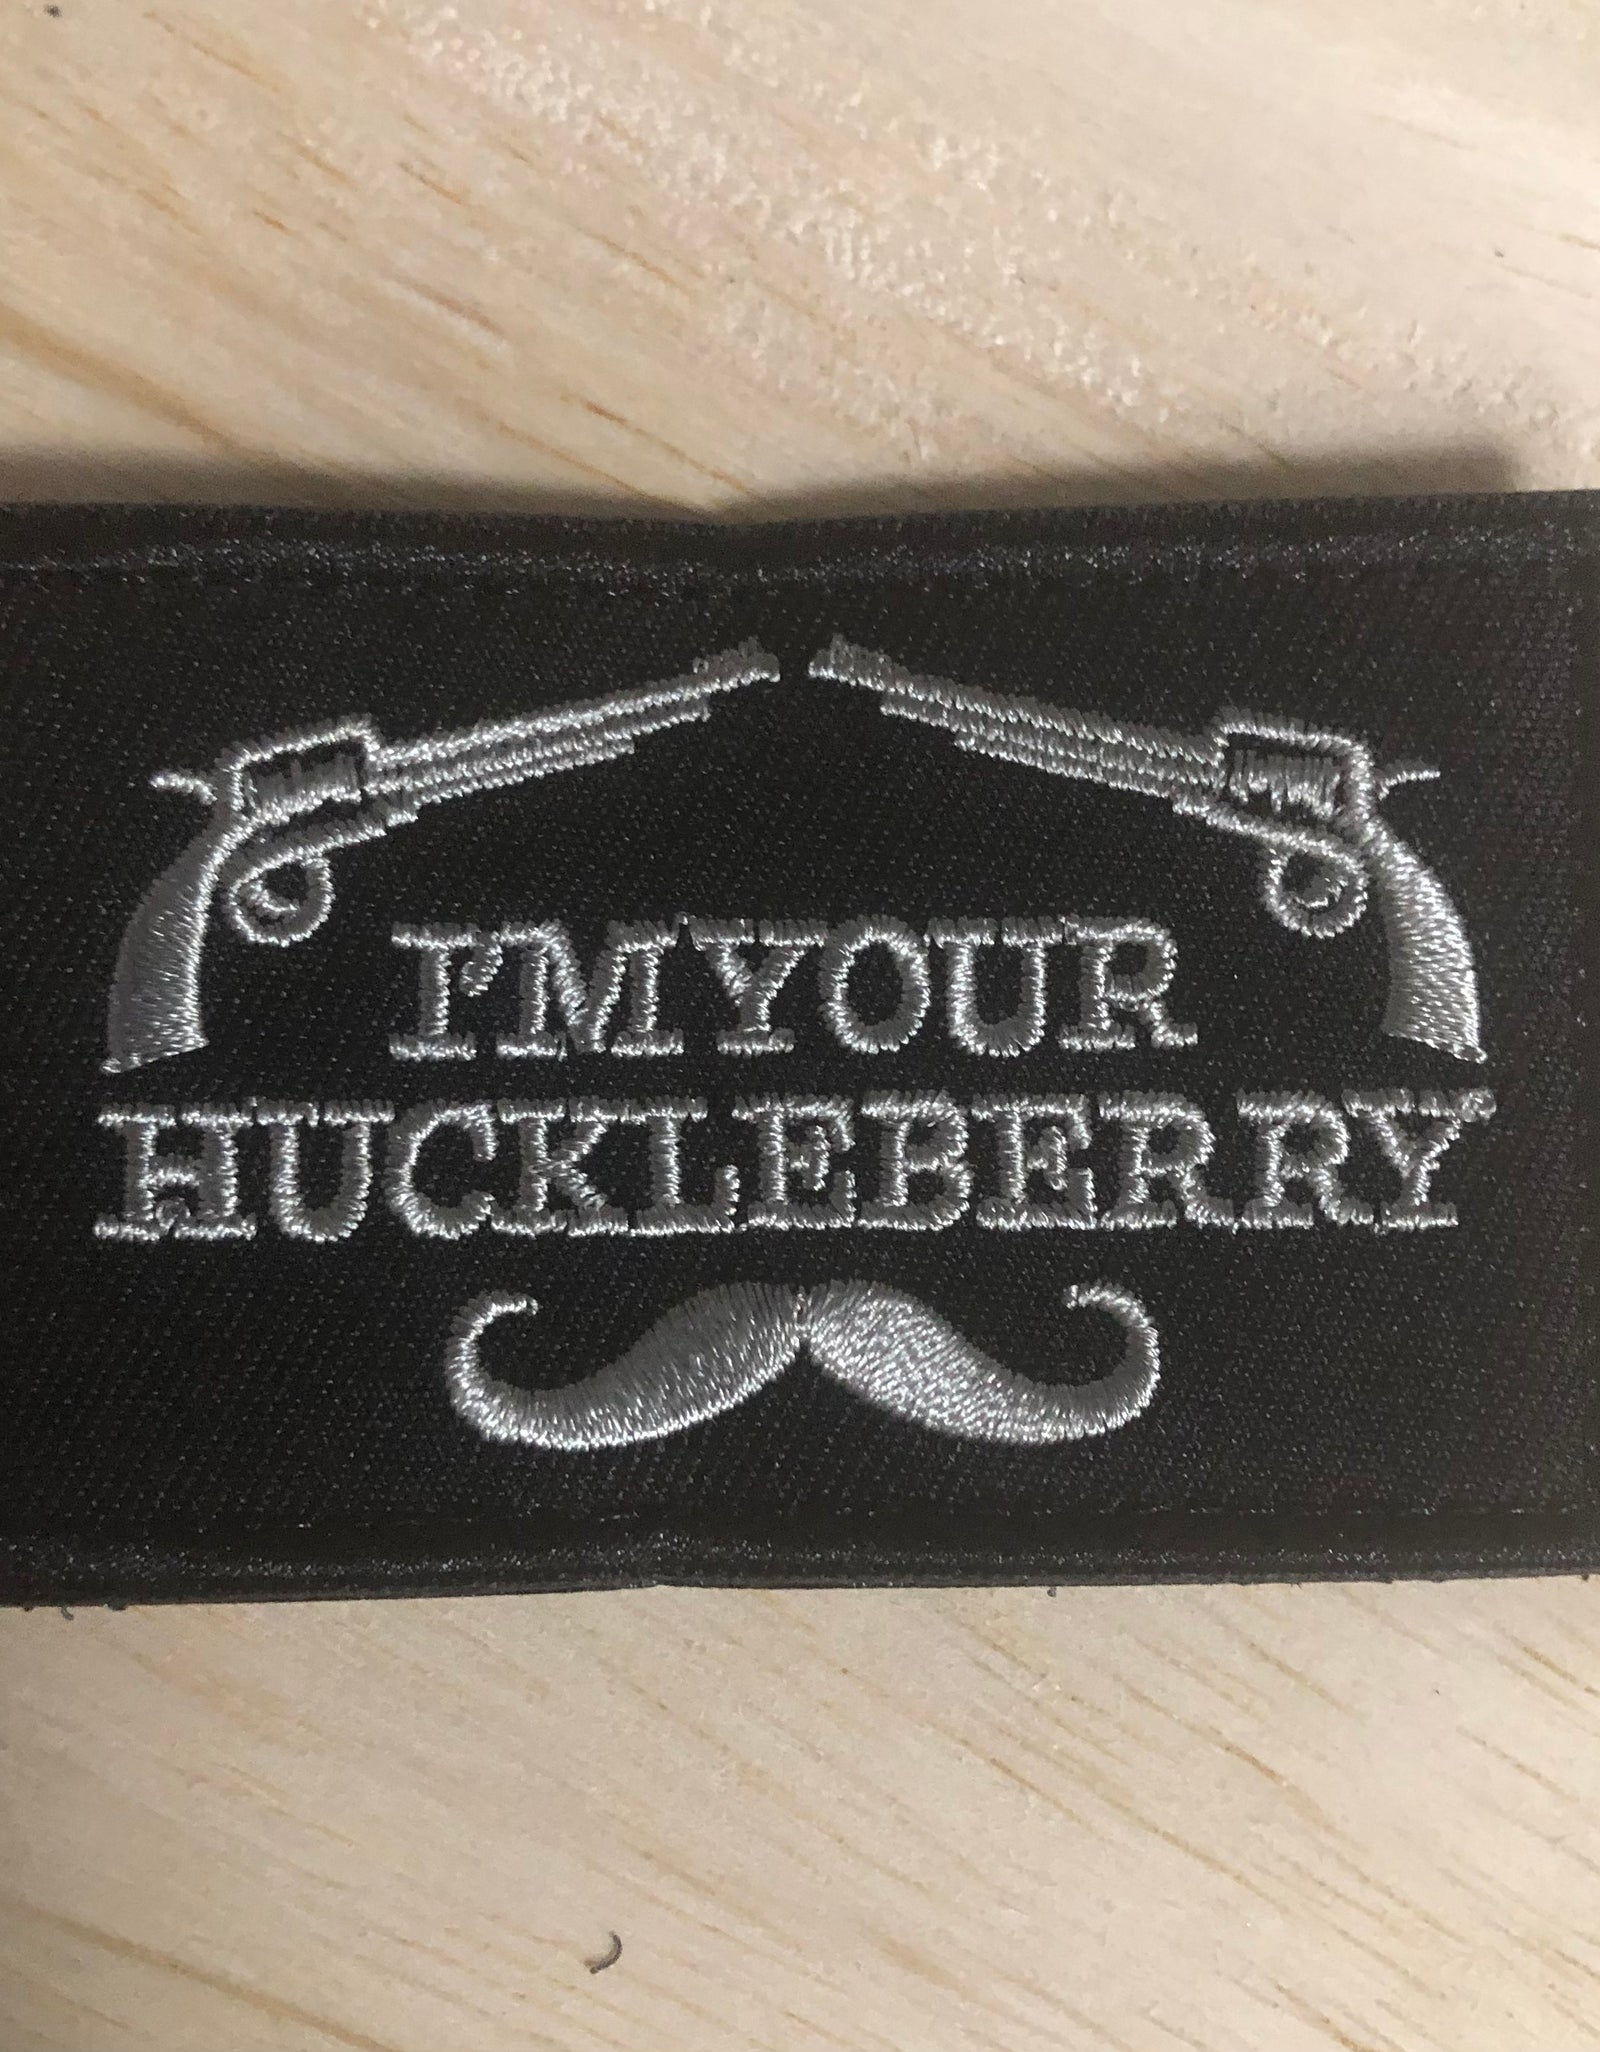 2 Pieces Patches I'm Your Huckleberry Funny Tactical Military Morale Patch  Hook & Loop Tactical Patch 